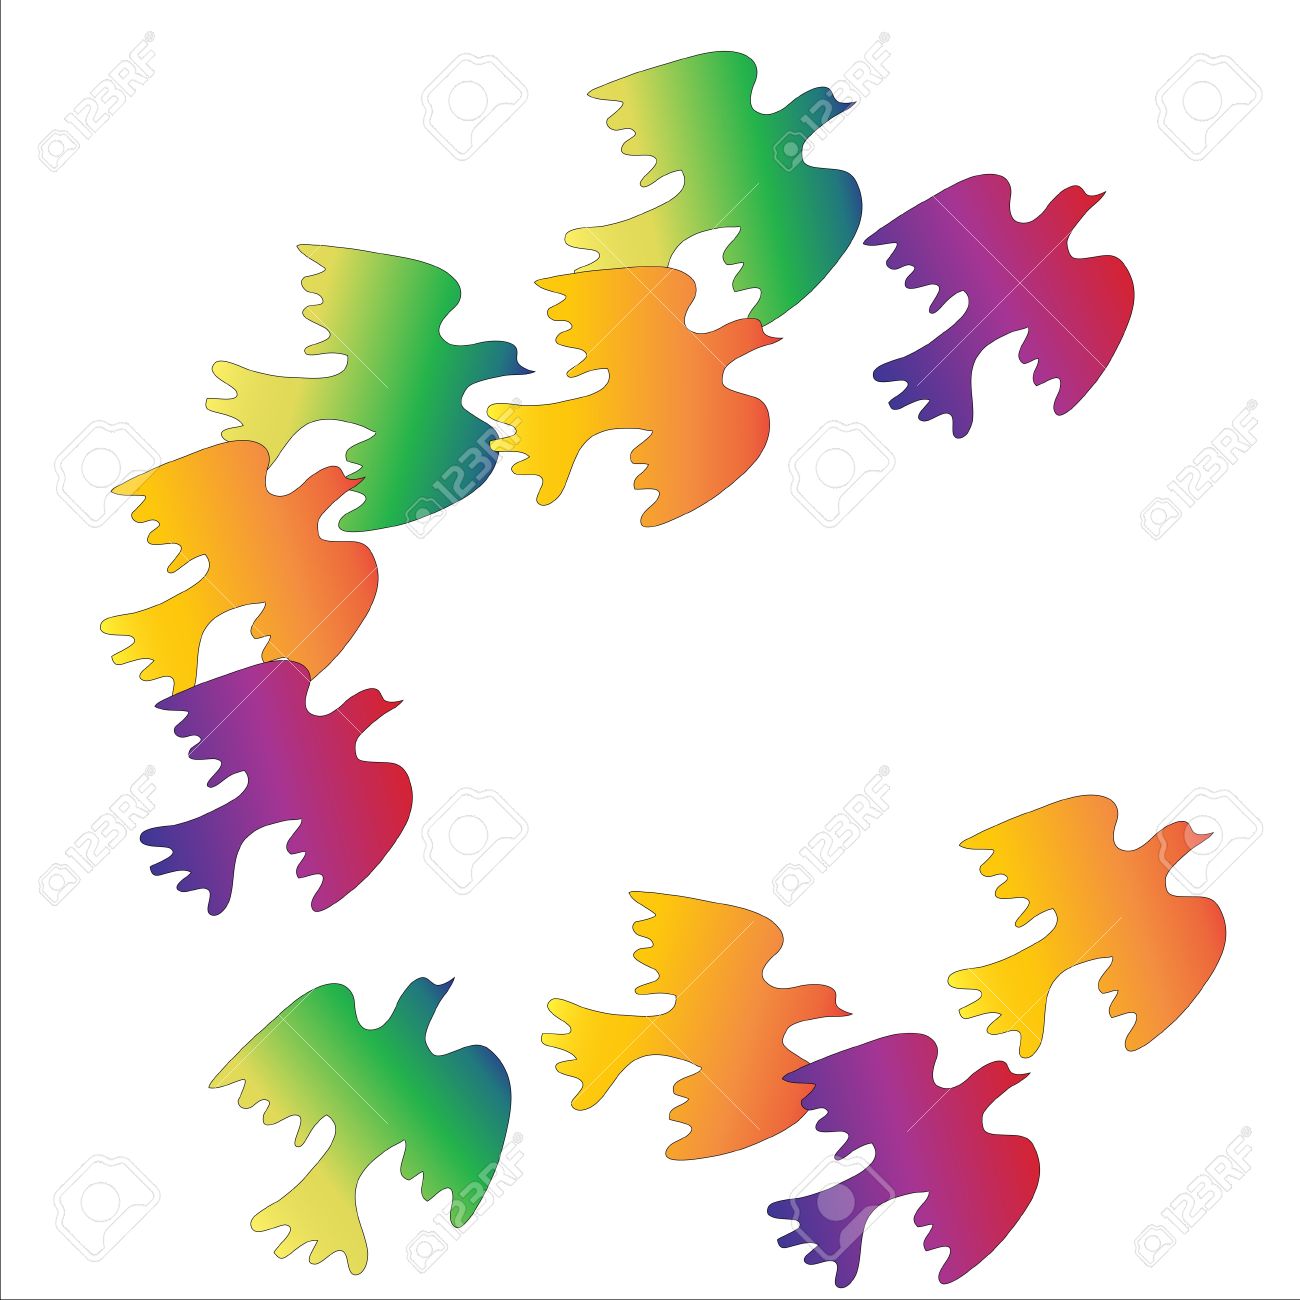 flock of colorful birds on white background Stock Vector - 14752859